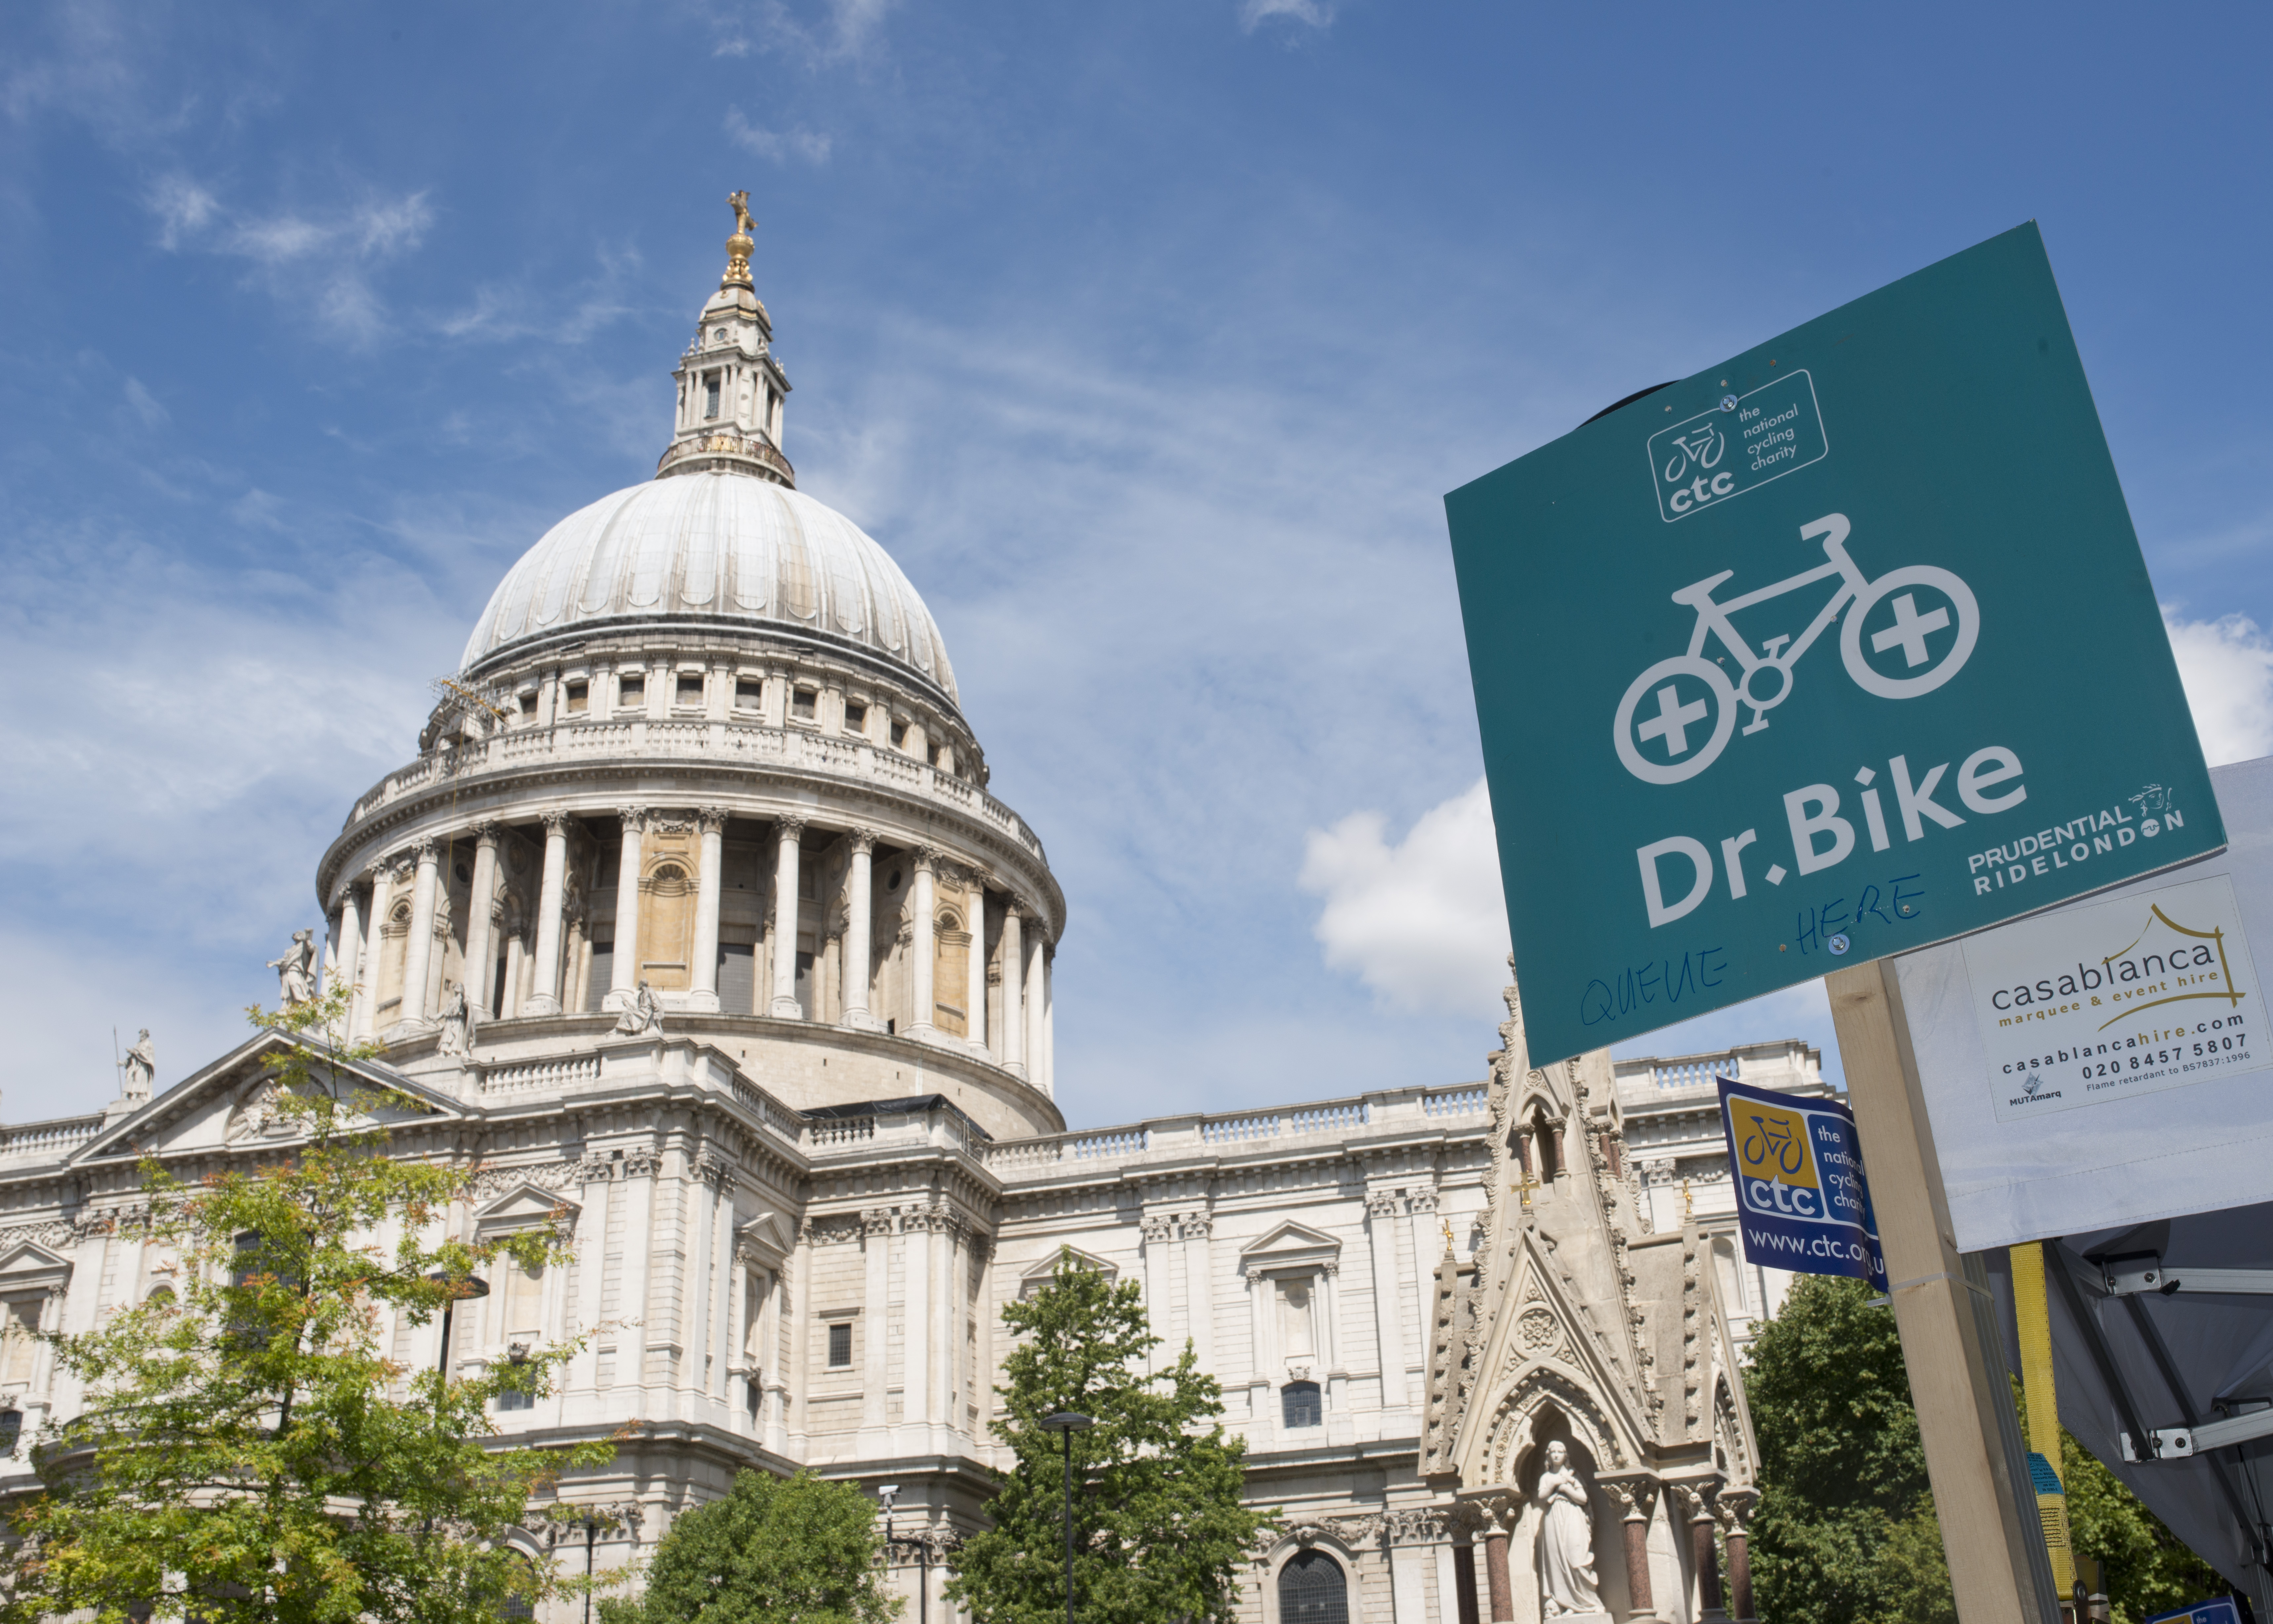 Dr Bike at St Pauls was a busy spot